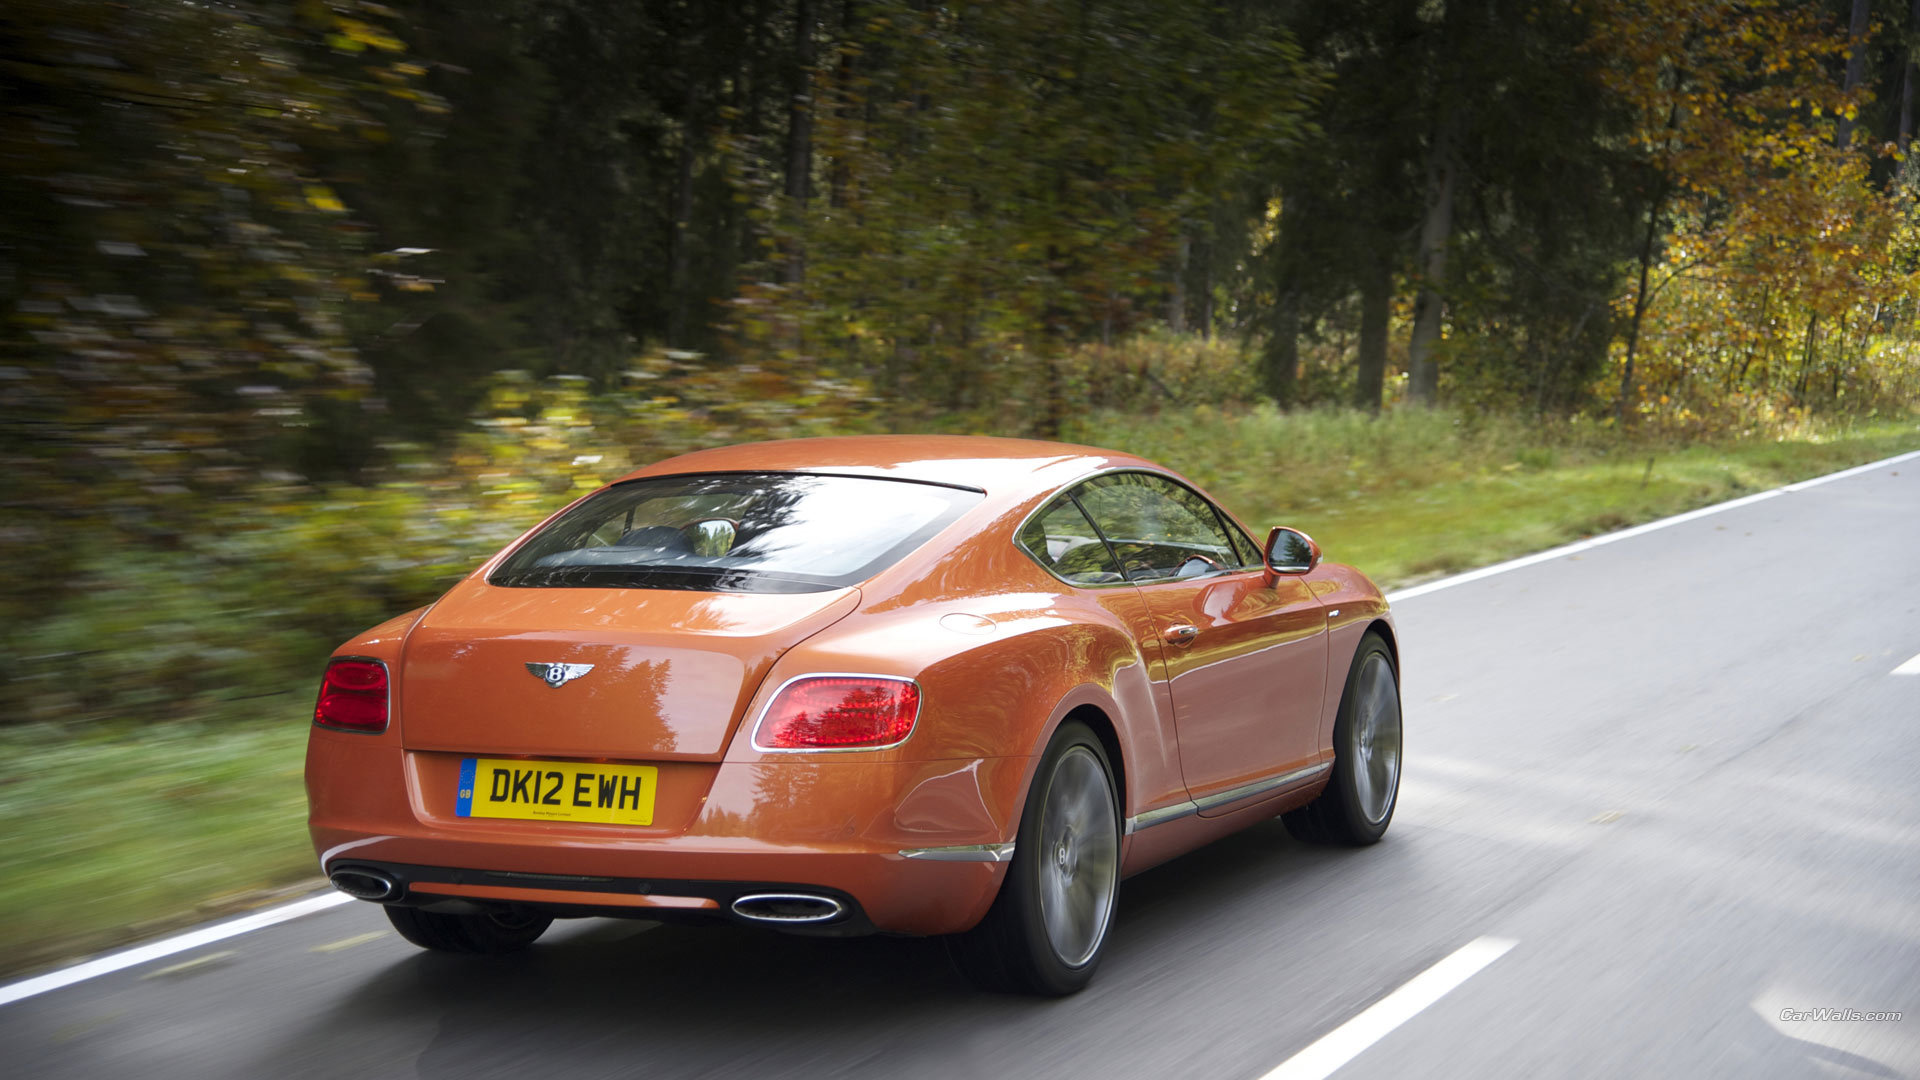 Best Bentley Continental GT wallpaper ID:465078 for High Resolution full hd 1080p PC